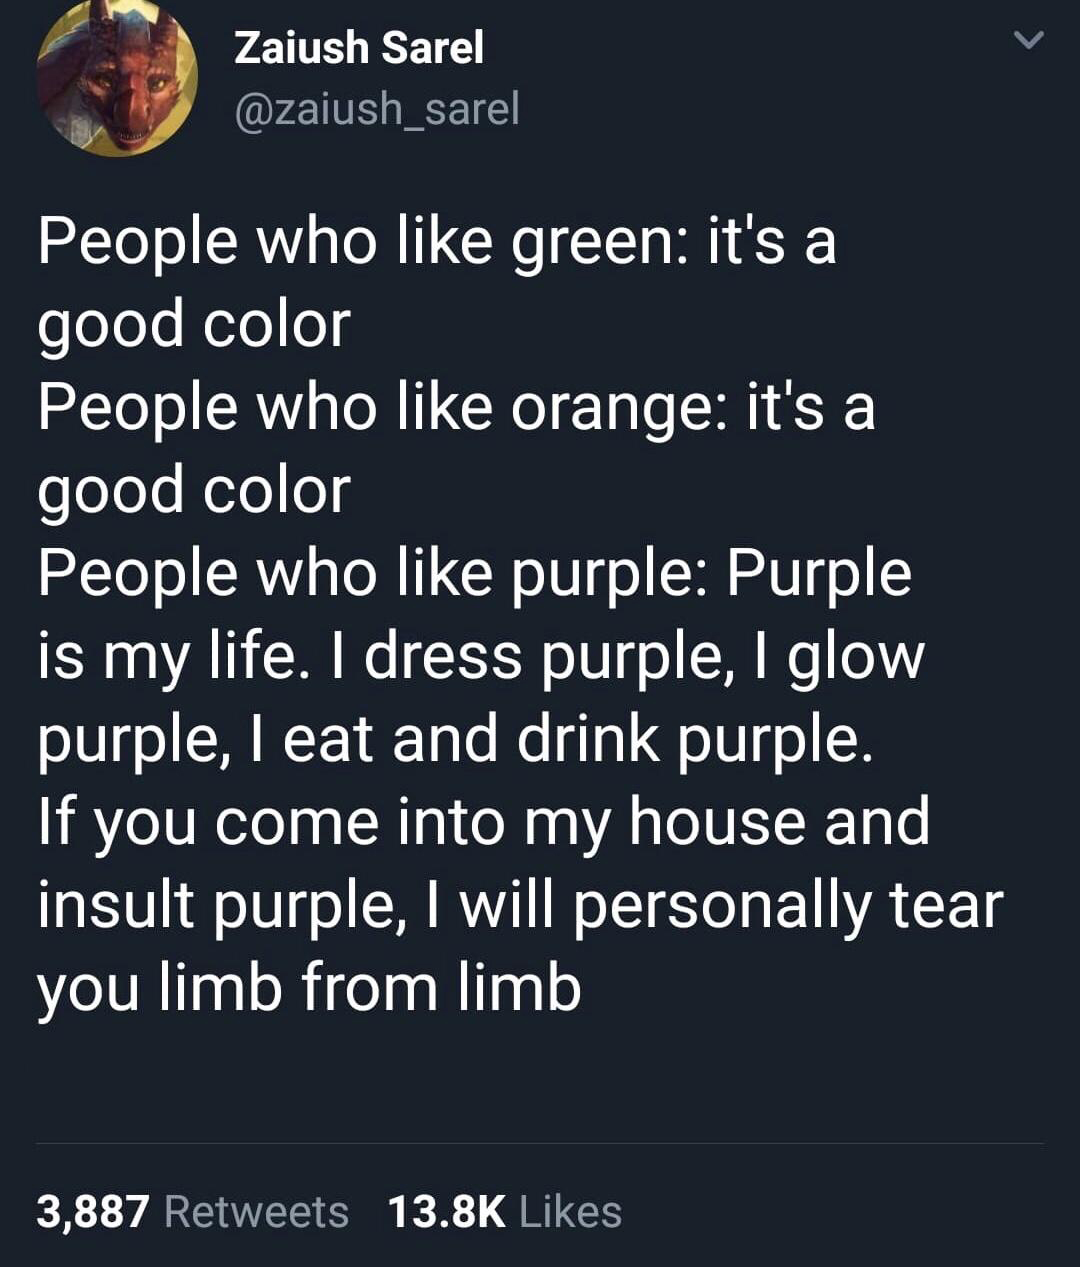 savage tweets - purple favorite color meme - Zaiush Sarel People who green it's a good color People who orange it's a good color People who purple Purple is my life. I dress purple, I glow purple, I eat and drink purple. If you come into my house and insu